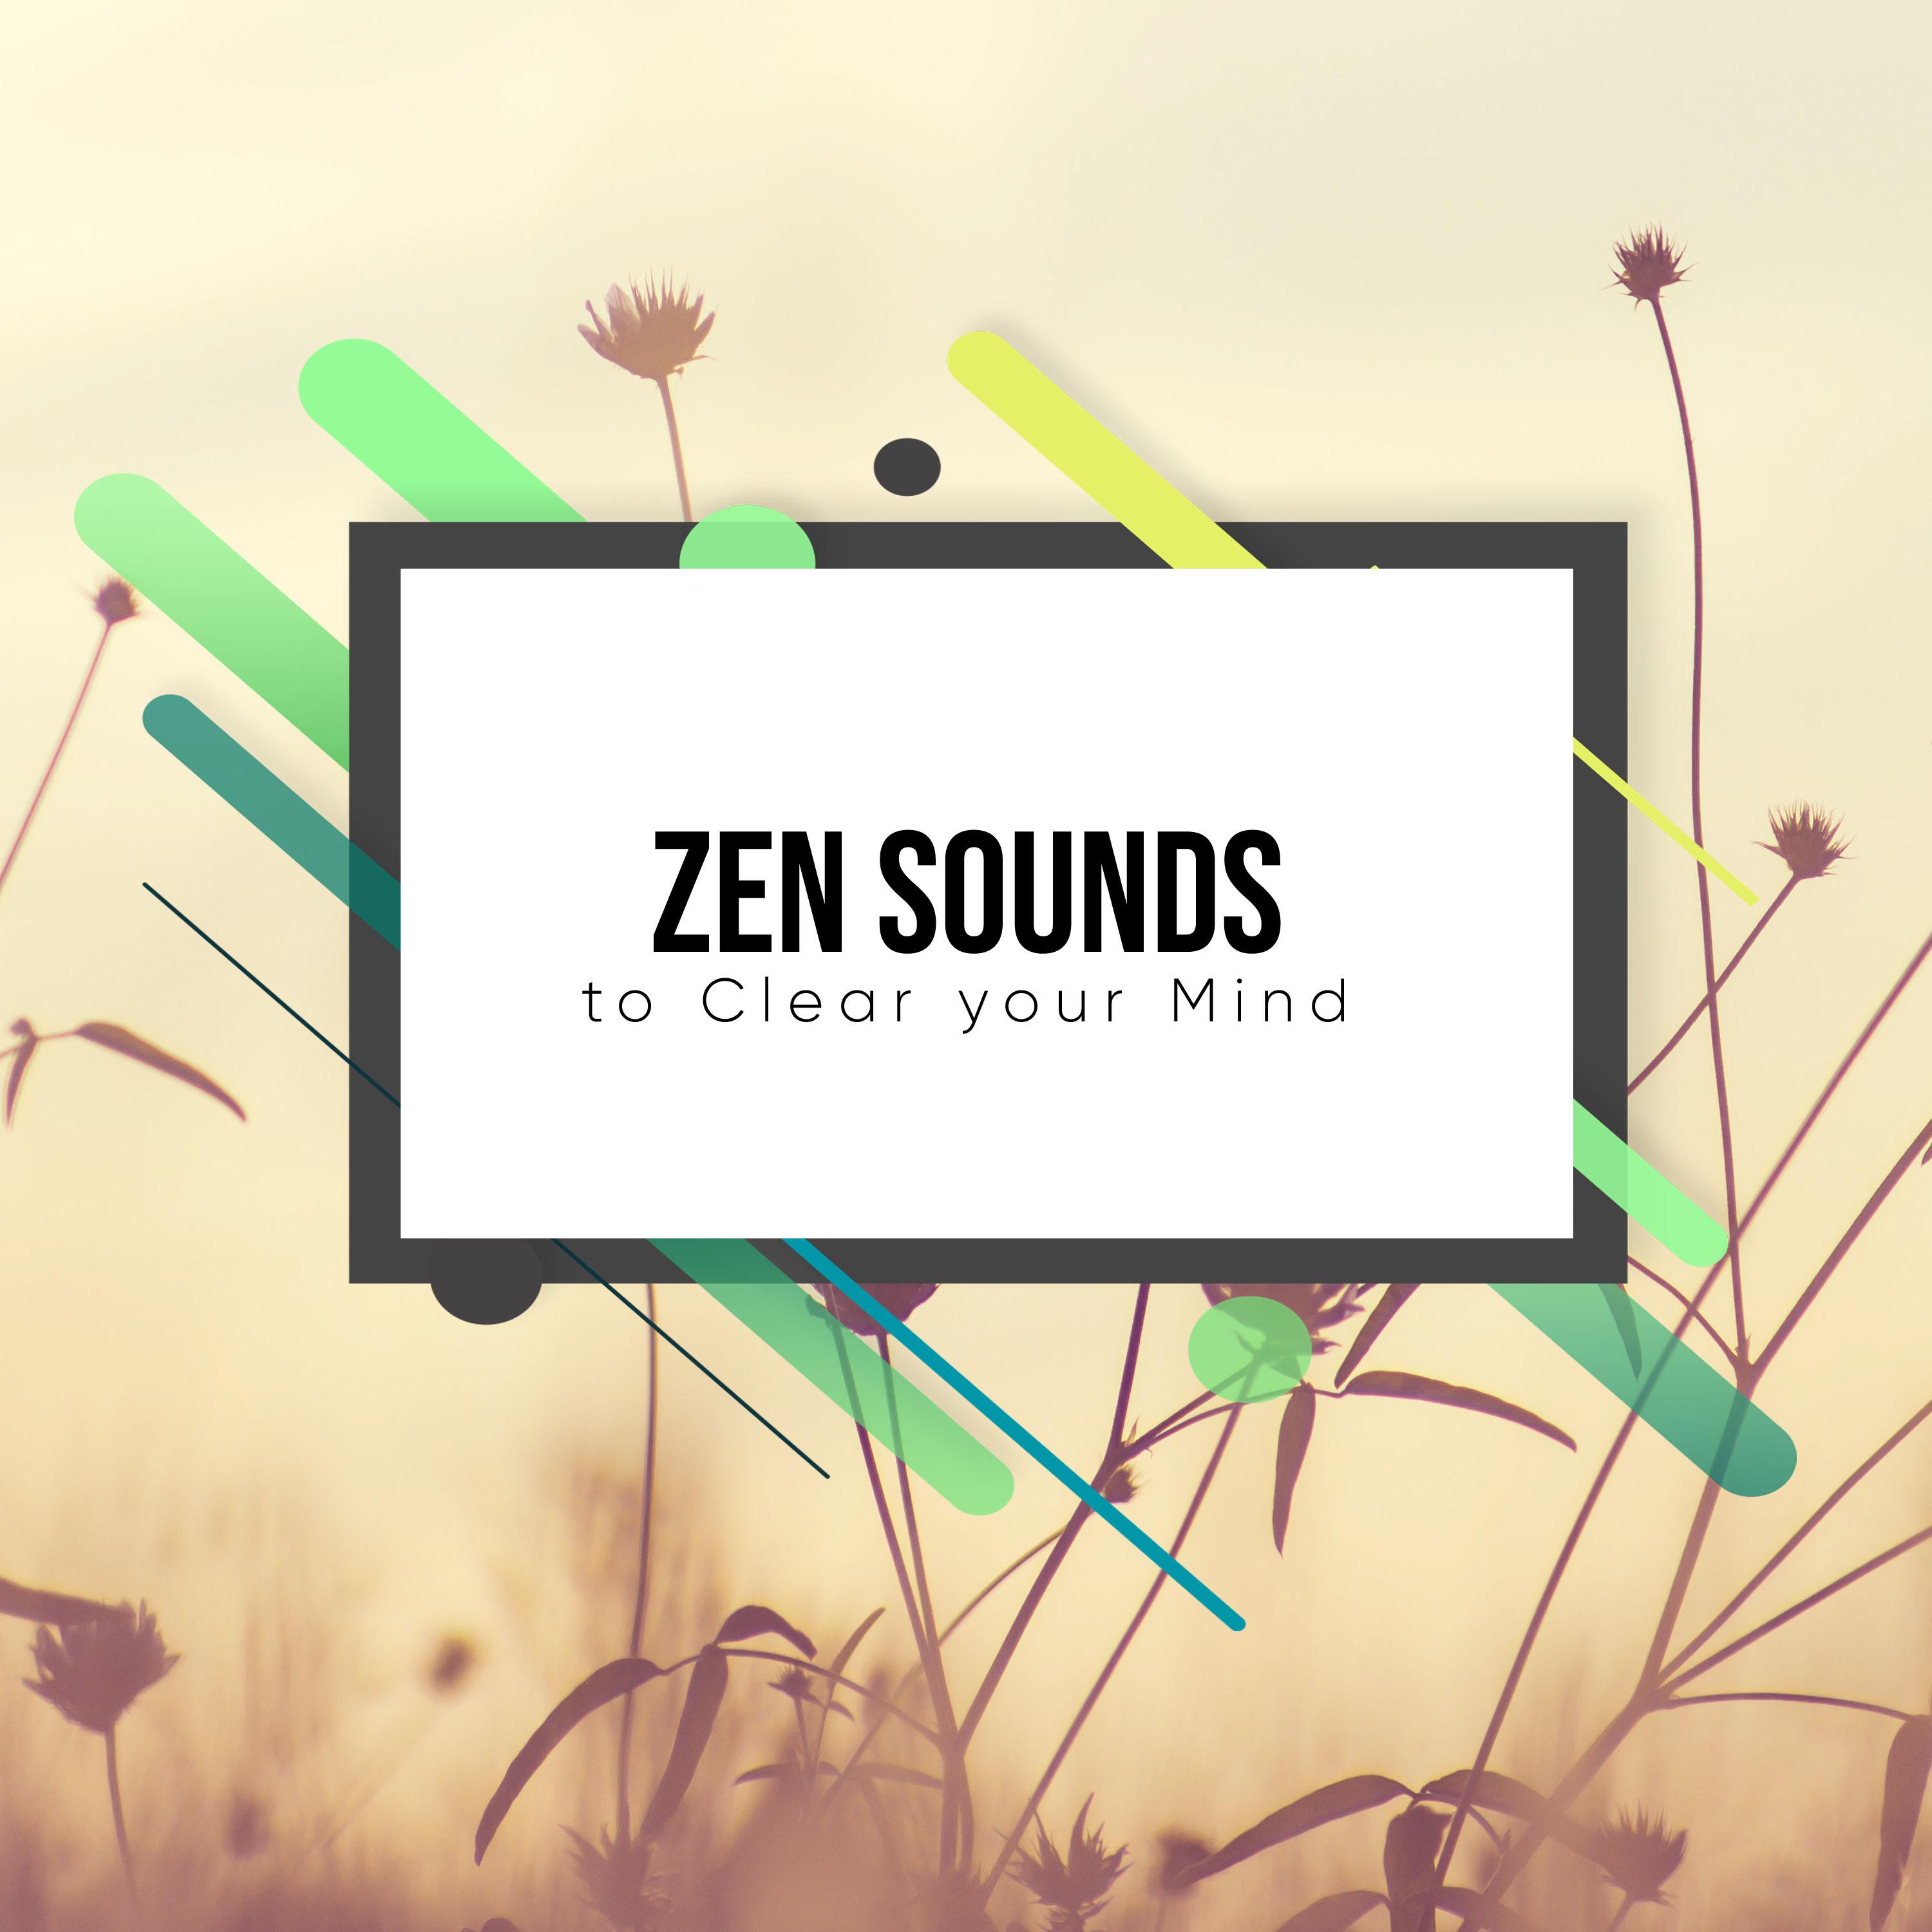 #21 Zen Sounds to Clear your Mind